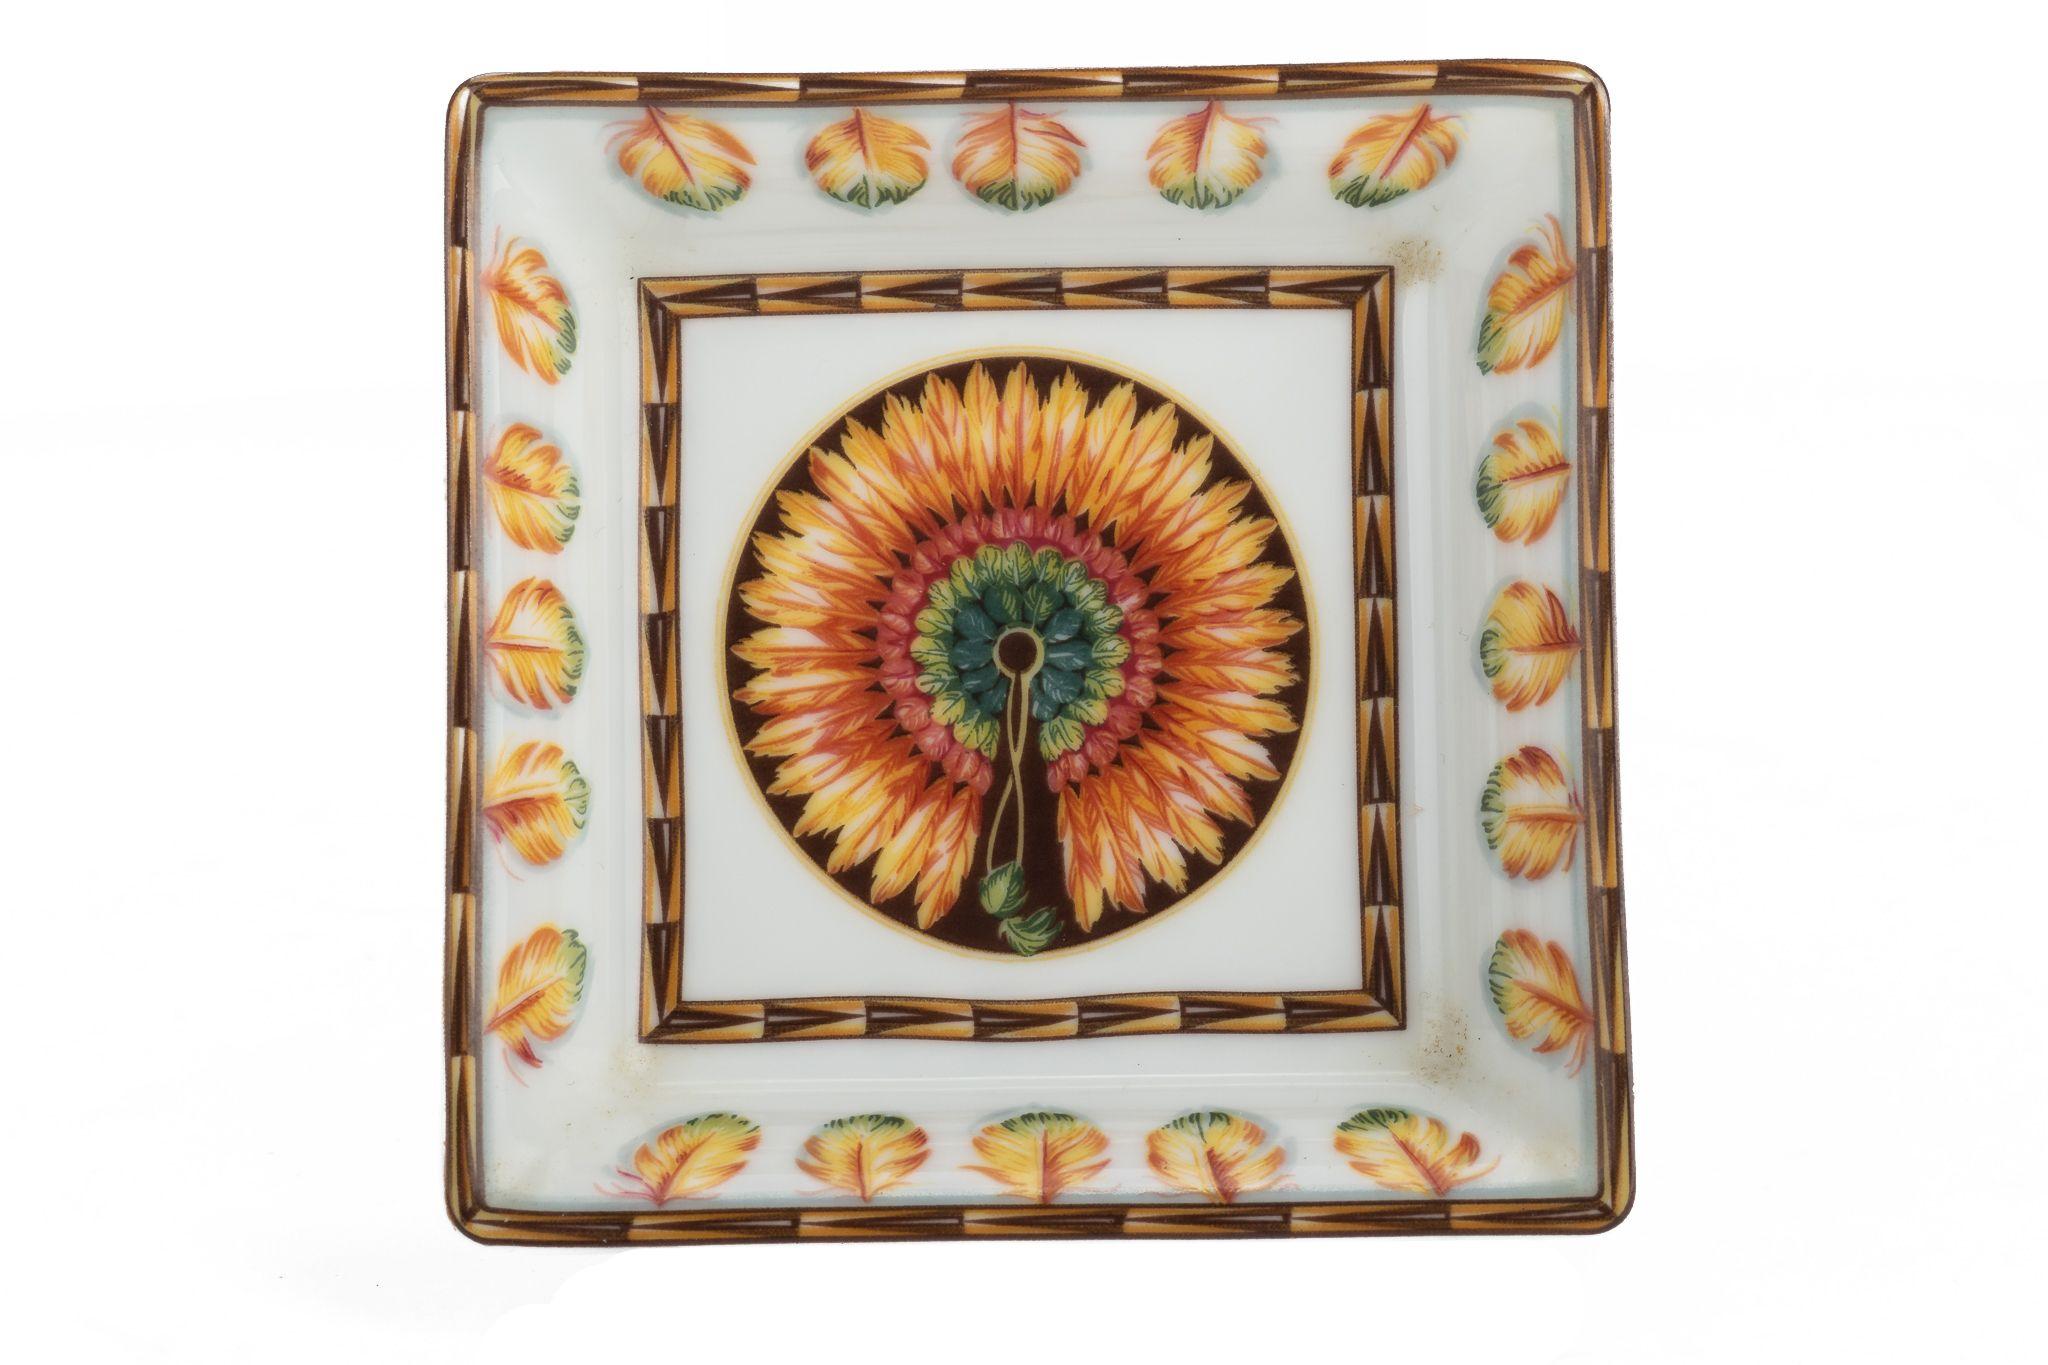 Hermès Brazil Porcelaine ashtray. The piece is square and the paint shows a big pheasant in the center opening is feathers. The tray is in excellent condition and comes with a box.